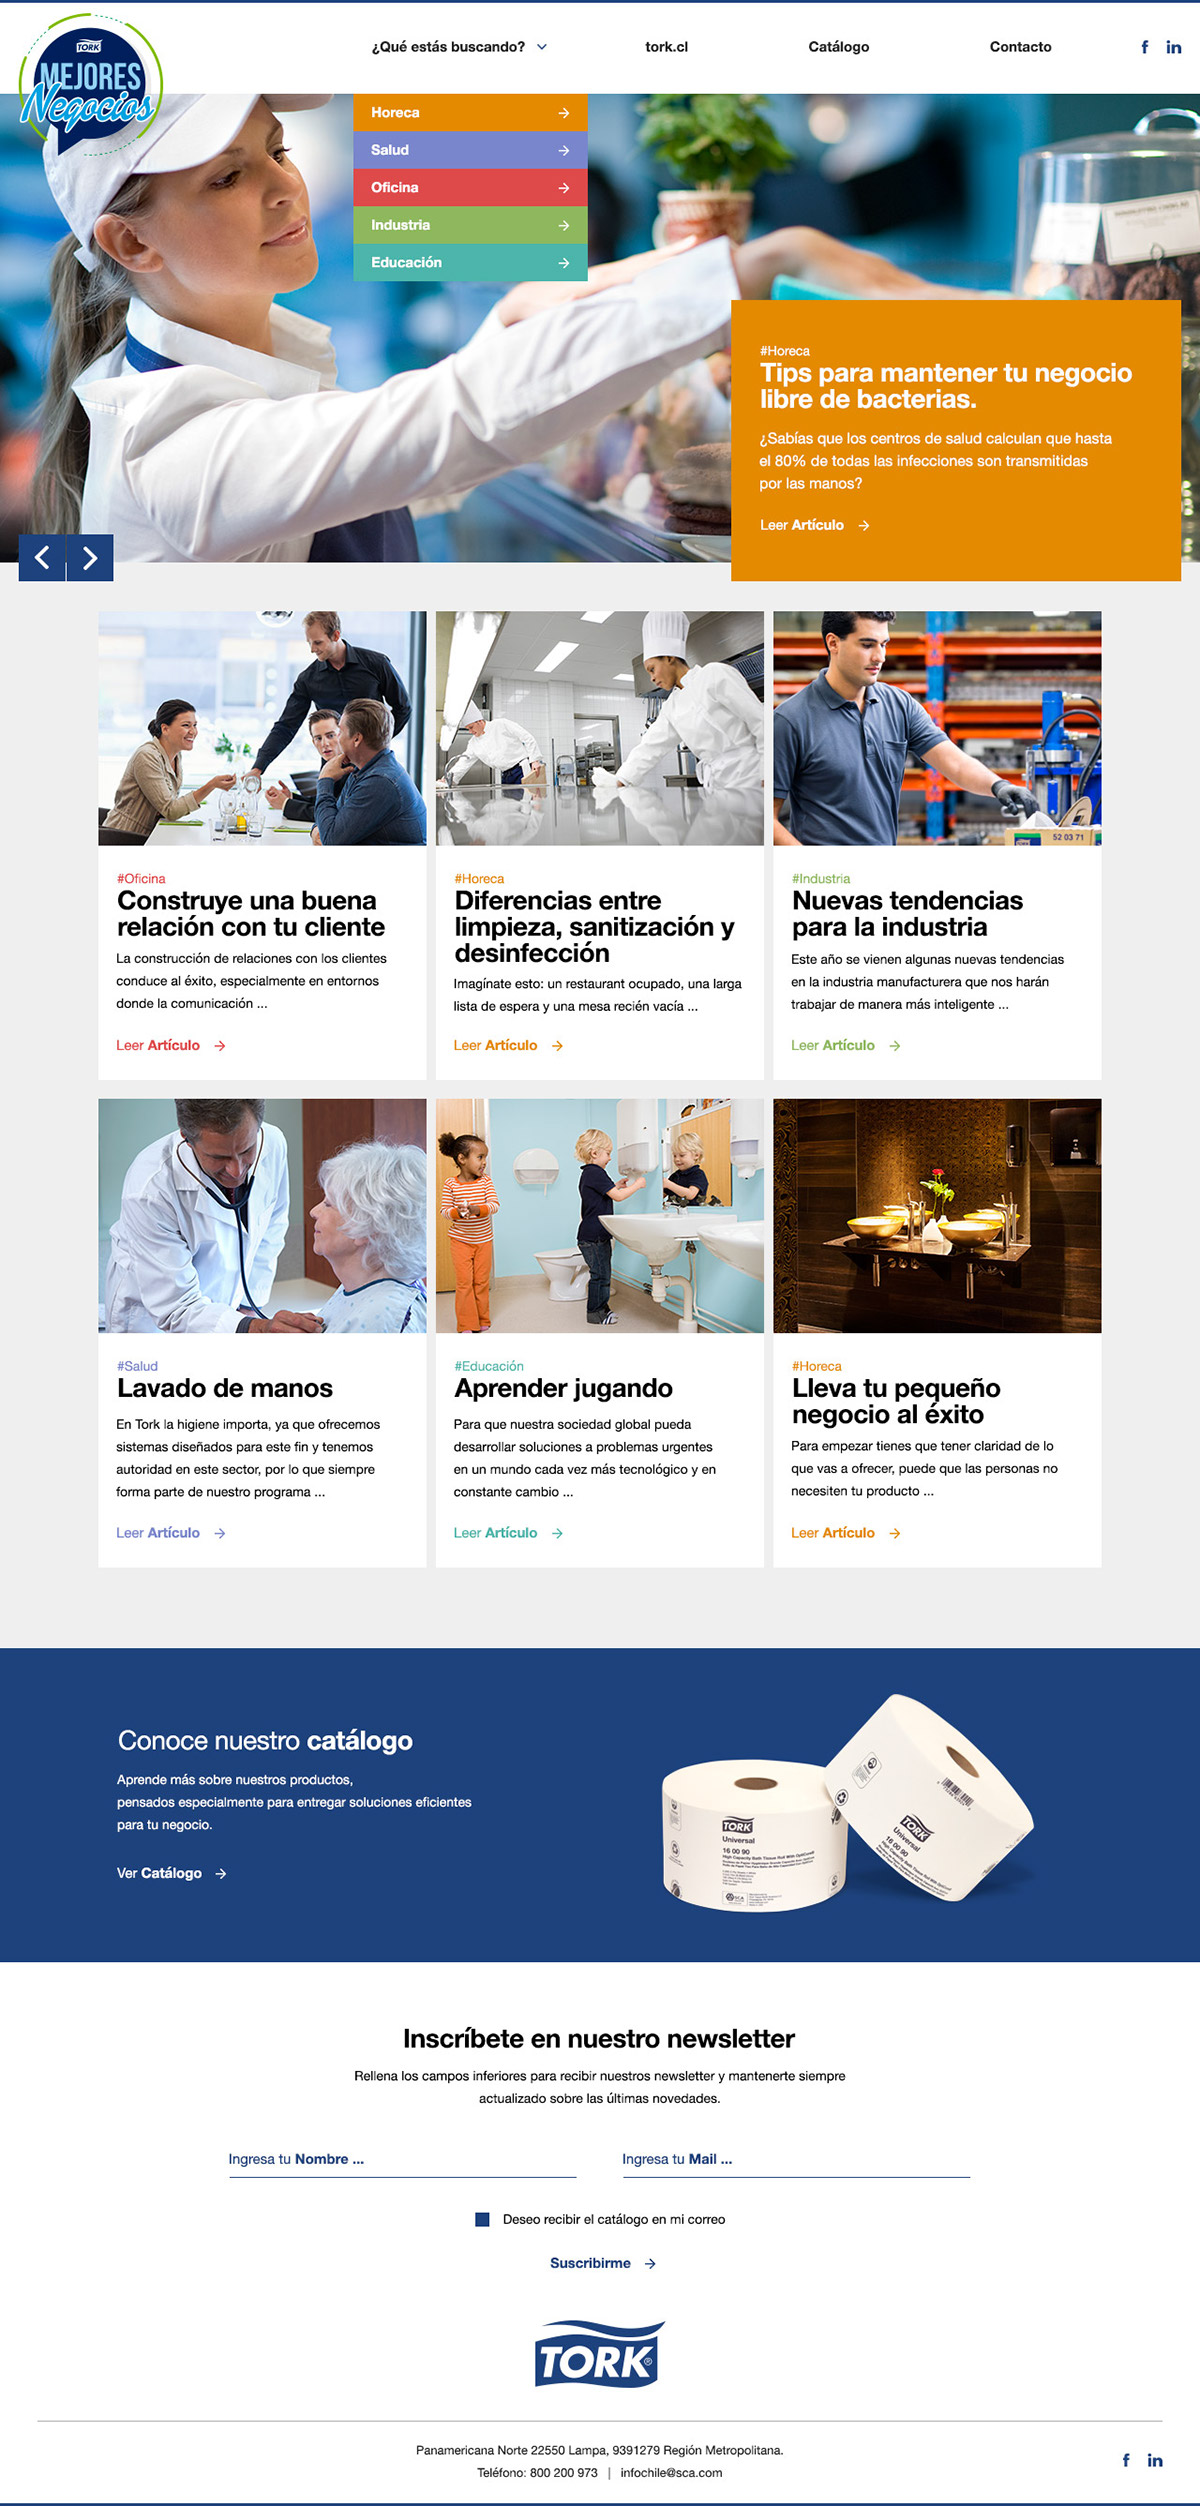 Blog Tork ideas negocios business Project proyecto